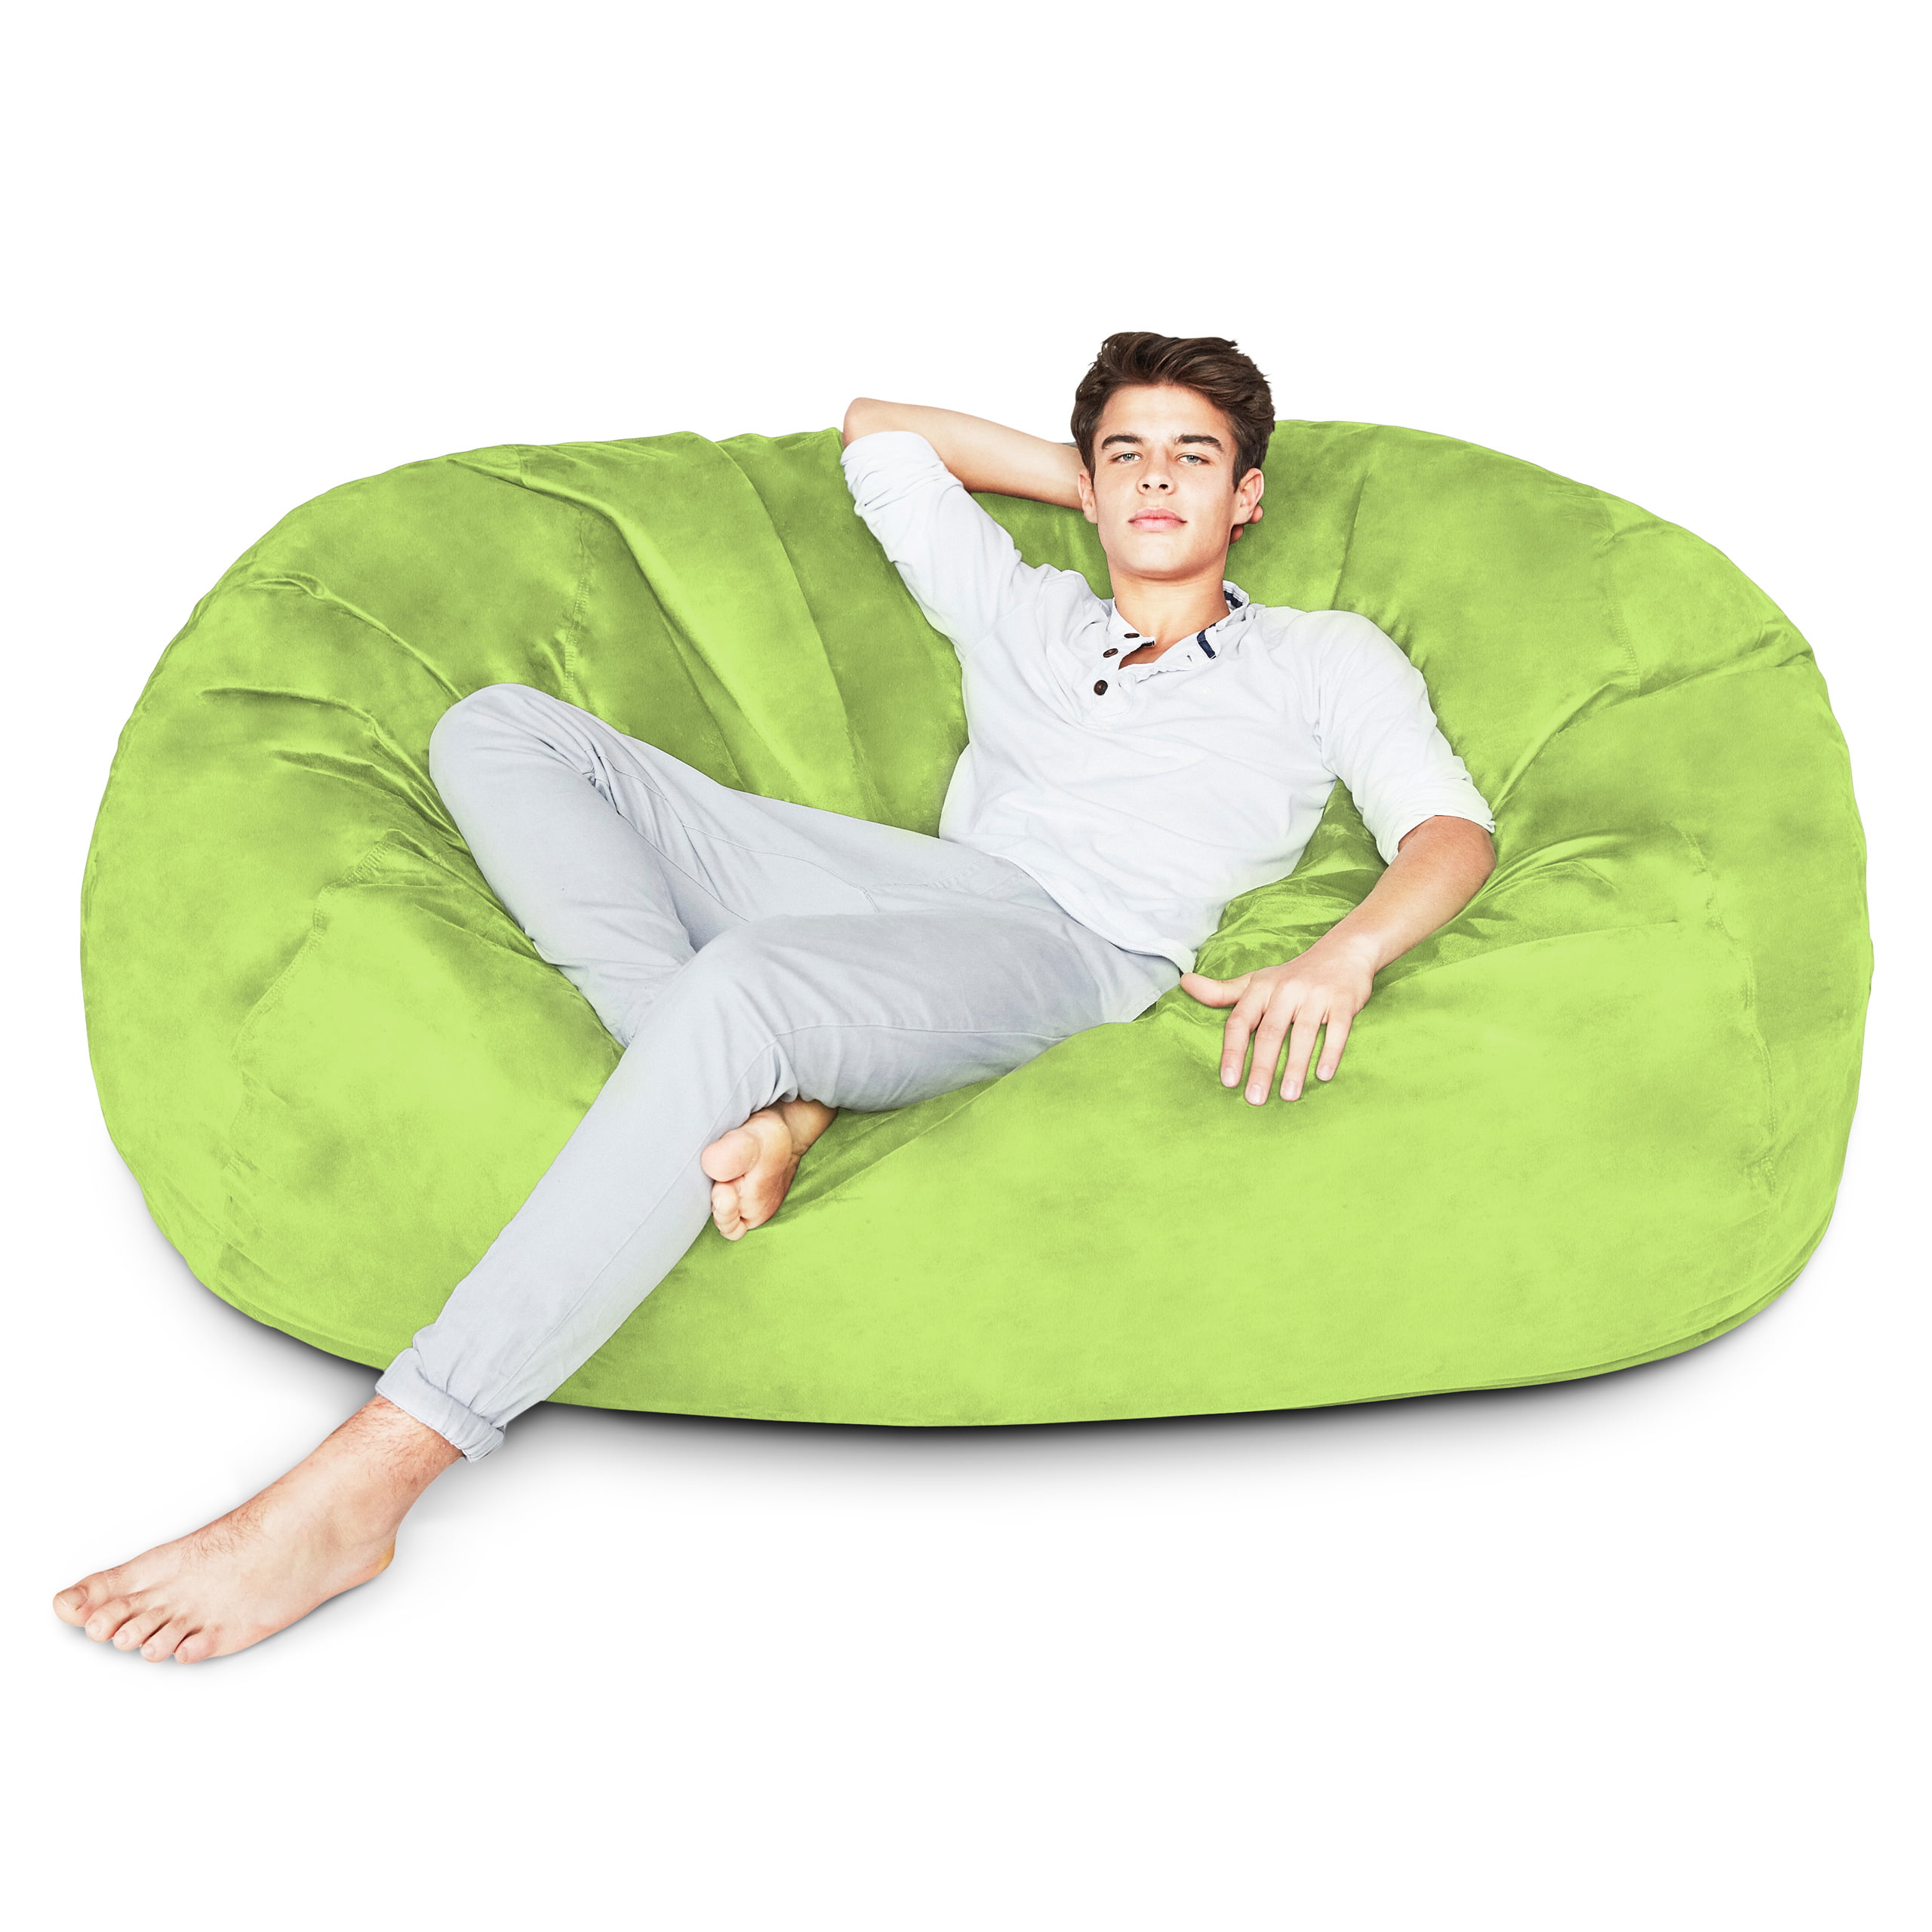 Lumaland Luxury 6-Foot Bean Bag Chair with Microsuede ...